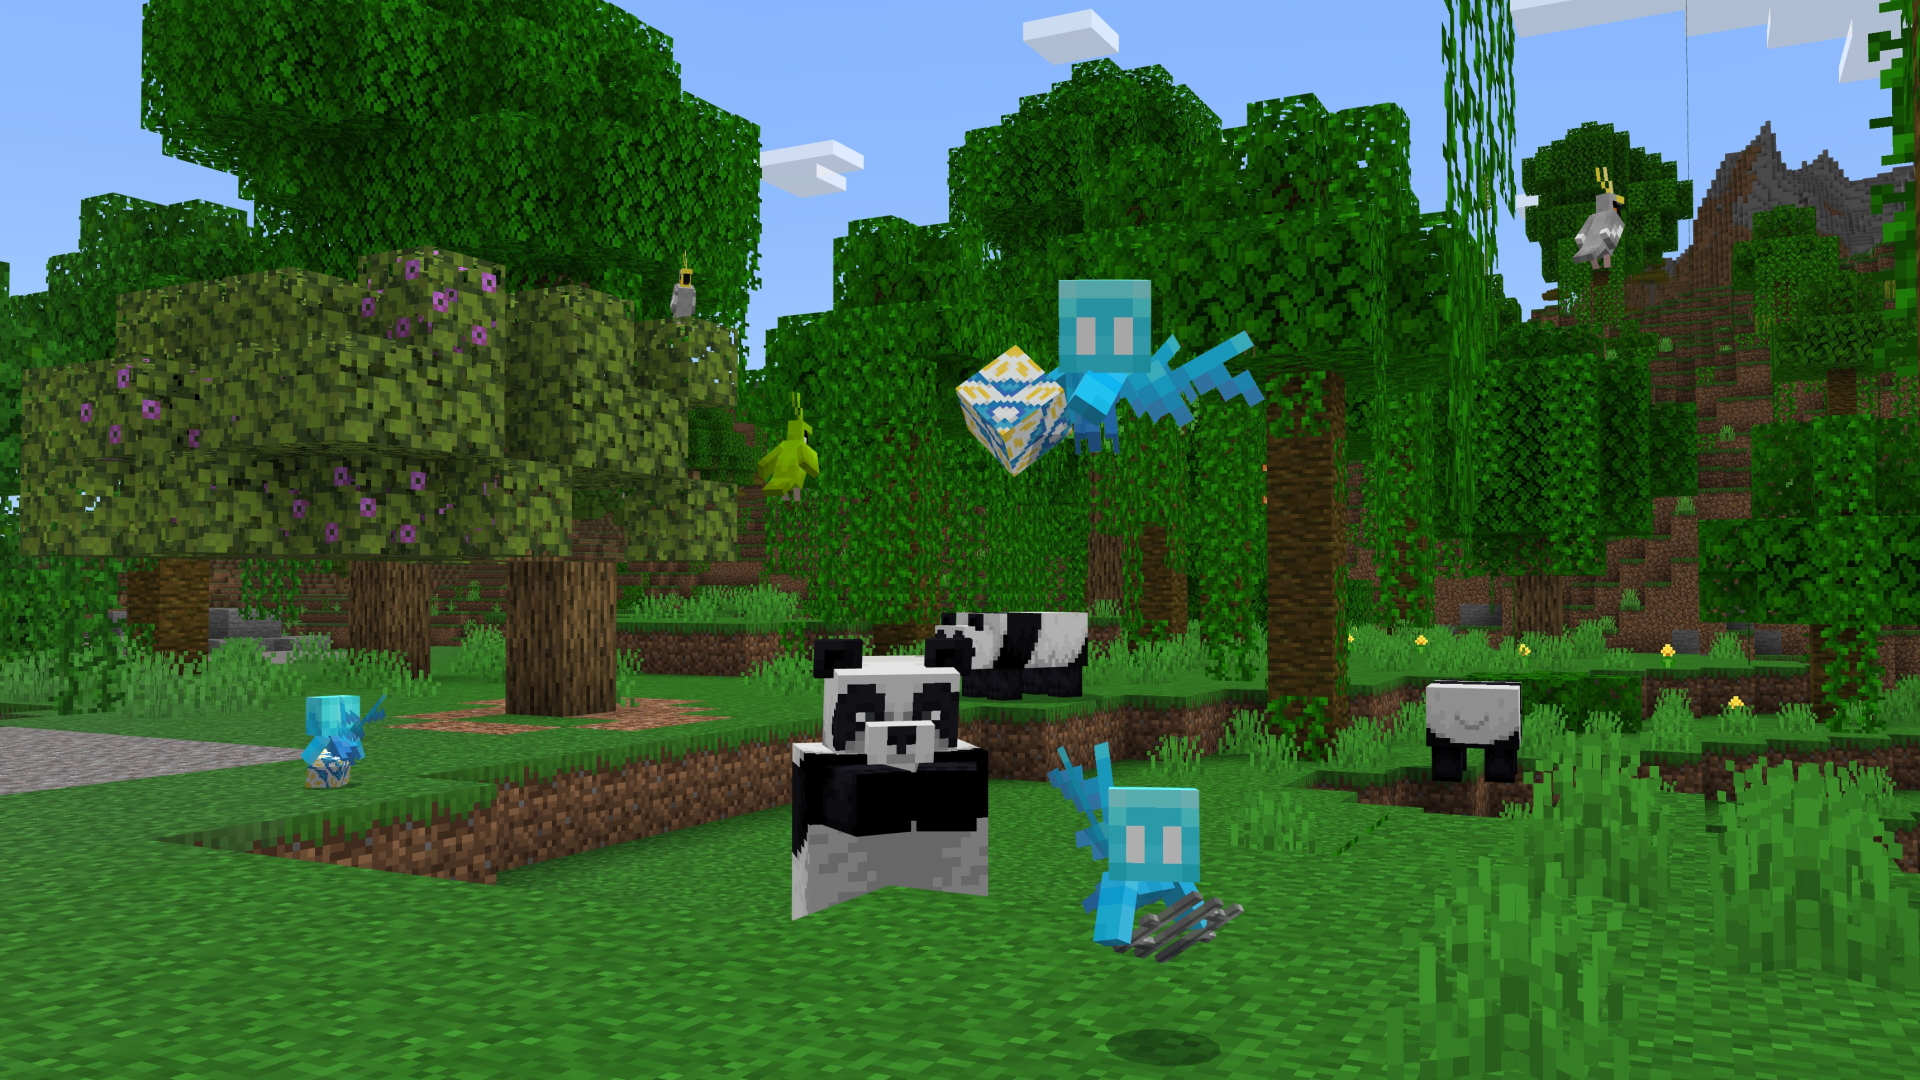 A Minecraft screenshot, featuring allays carrying items, as well as some pandas and parrots in a jungle setting.